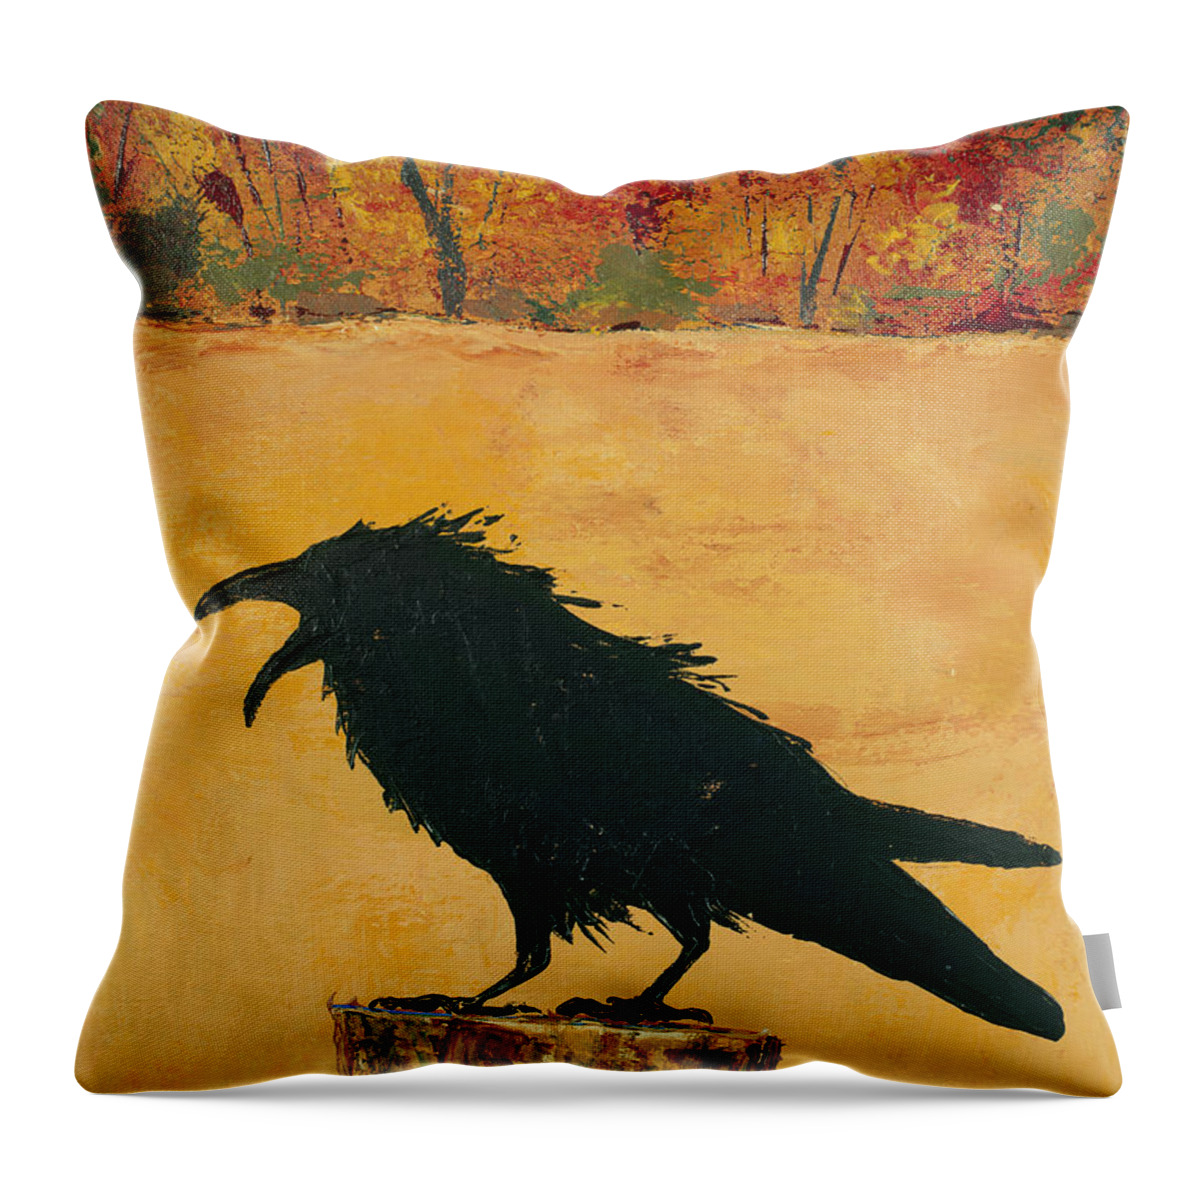 Raven Throw Pillow featuring the painting Autumn Raven by Carolyn Doe